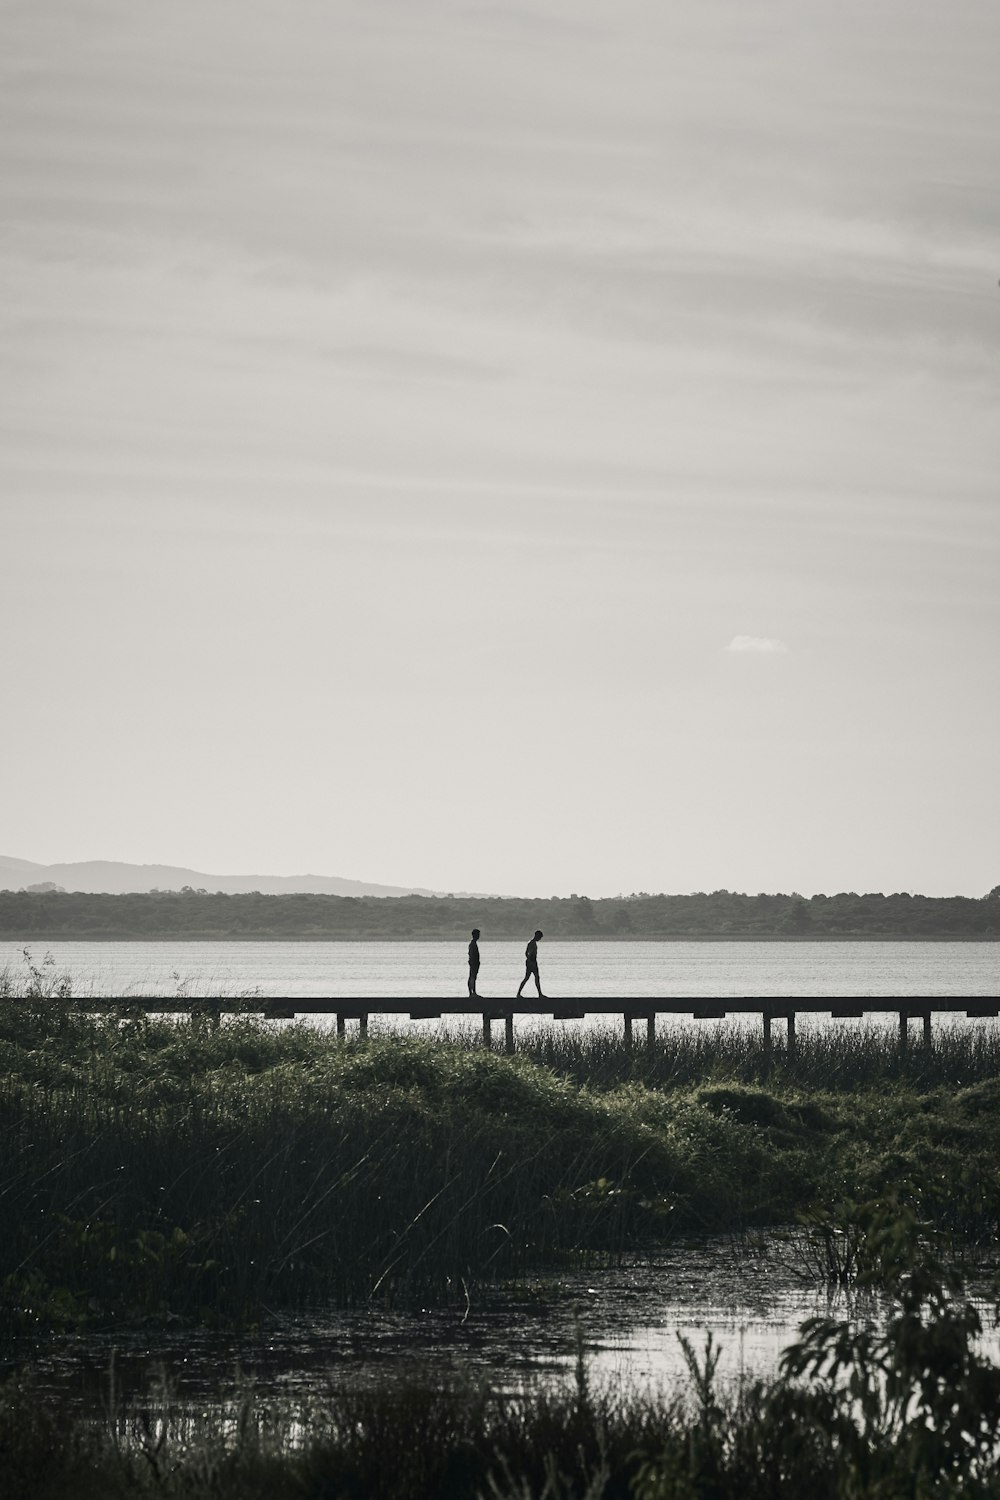 two people walking on a bridge over a body of water